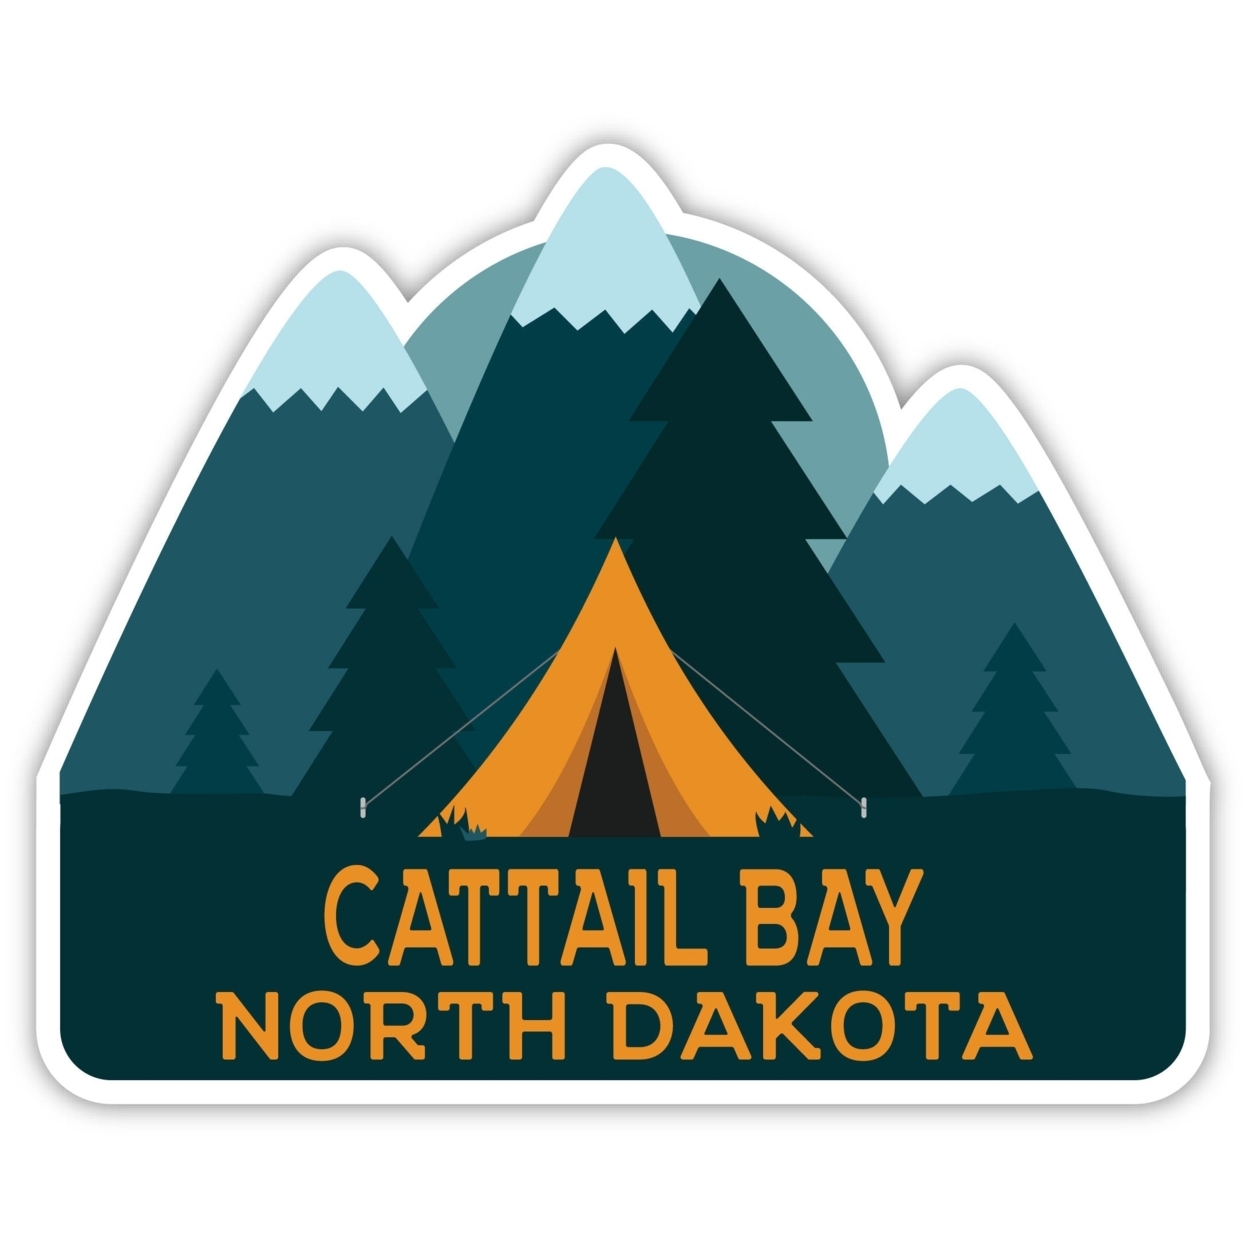 Cattail Bay North Dakota Souvenir Decorative Stickers (Choose Theme And Size) - 4-Pack, 4-Inch, Tent